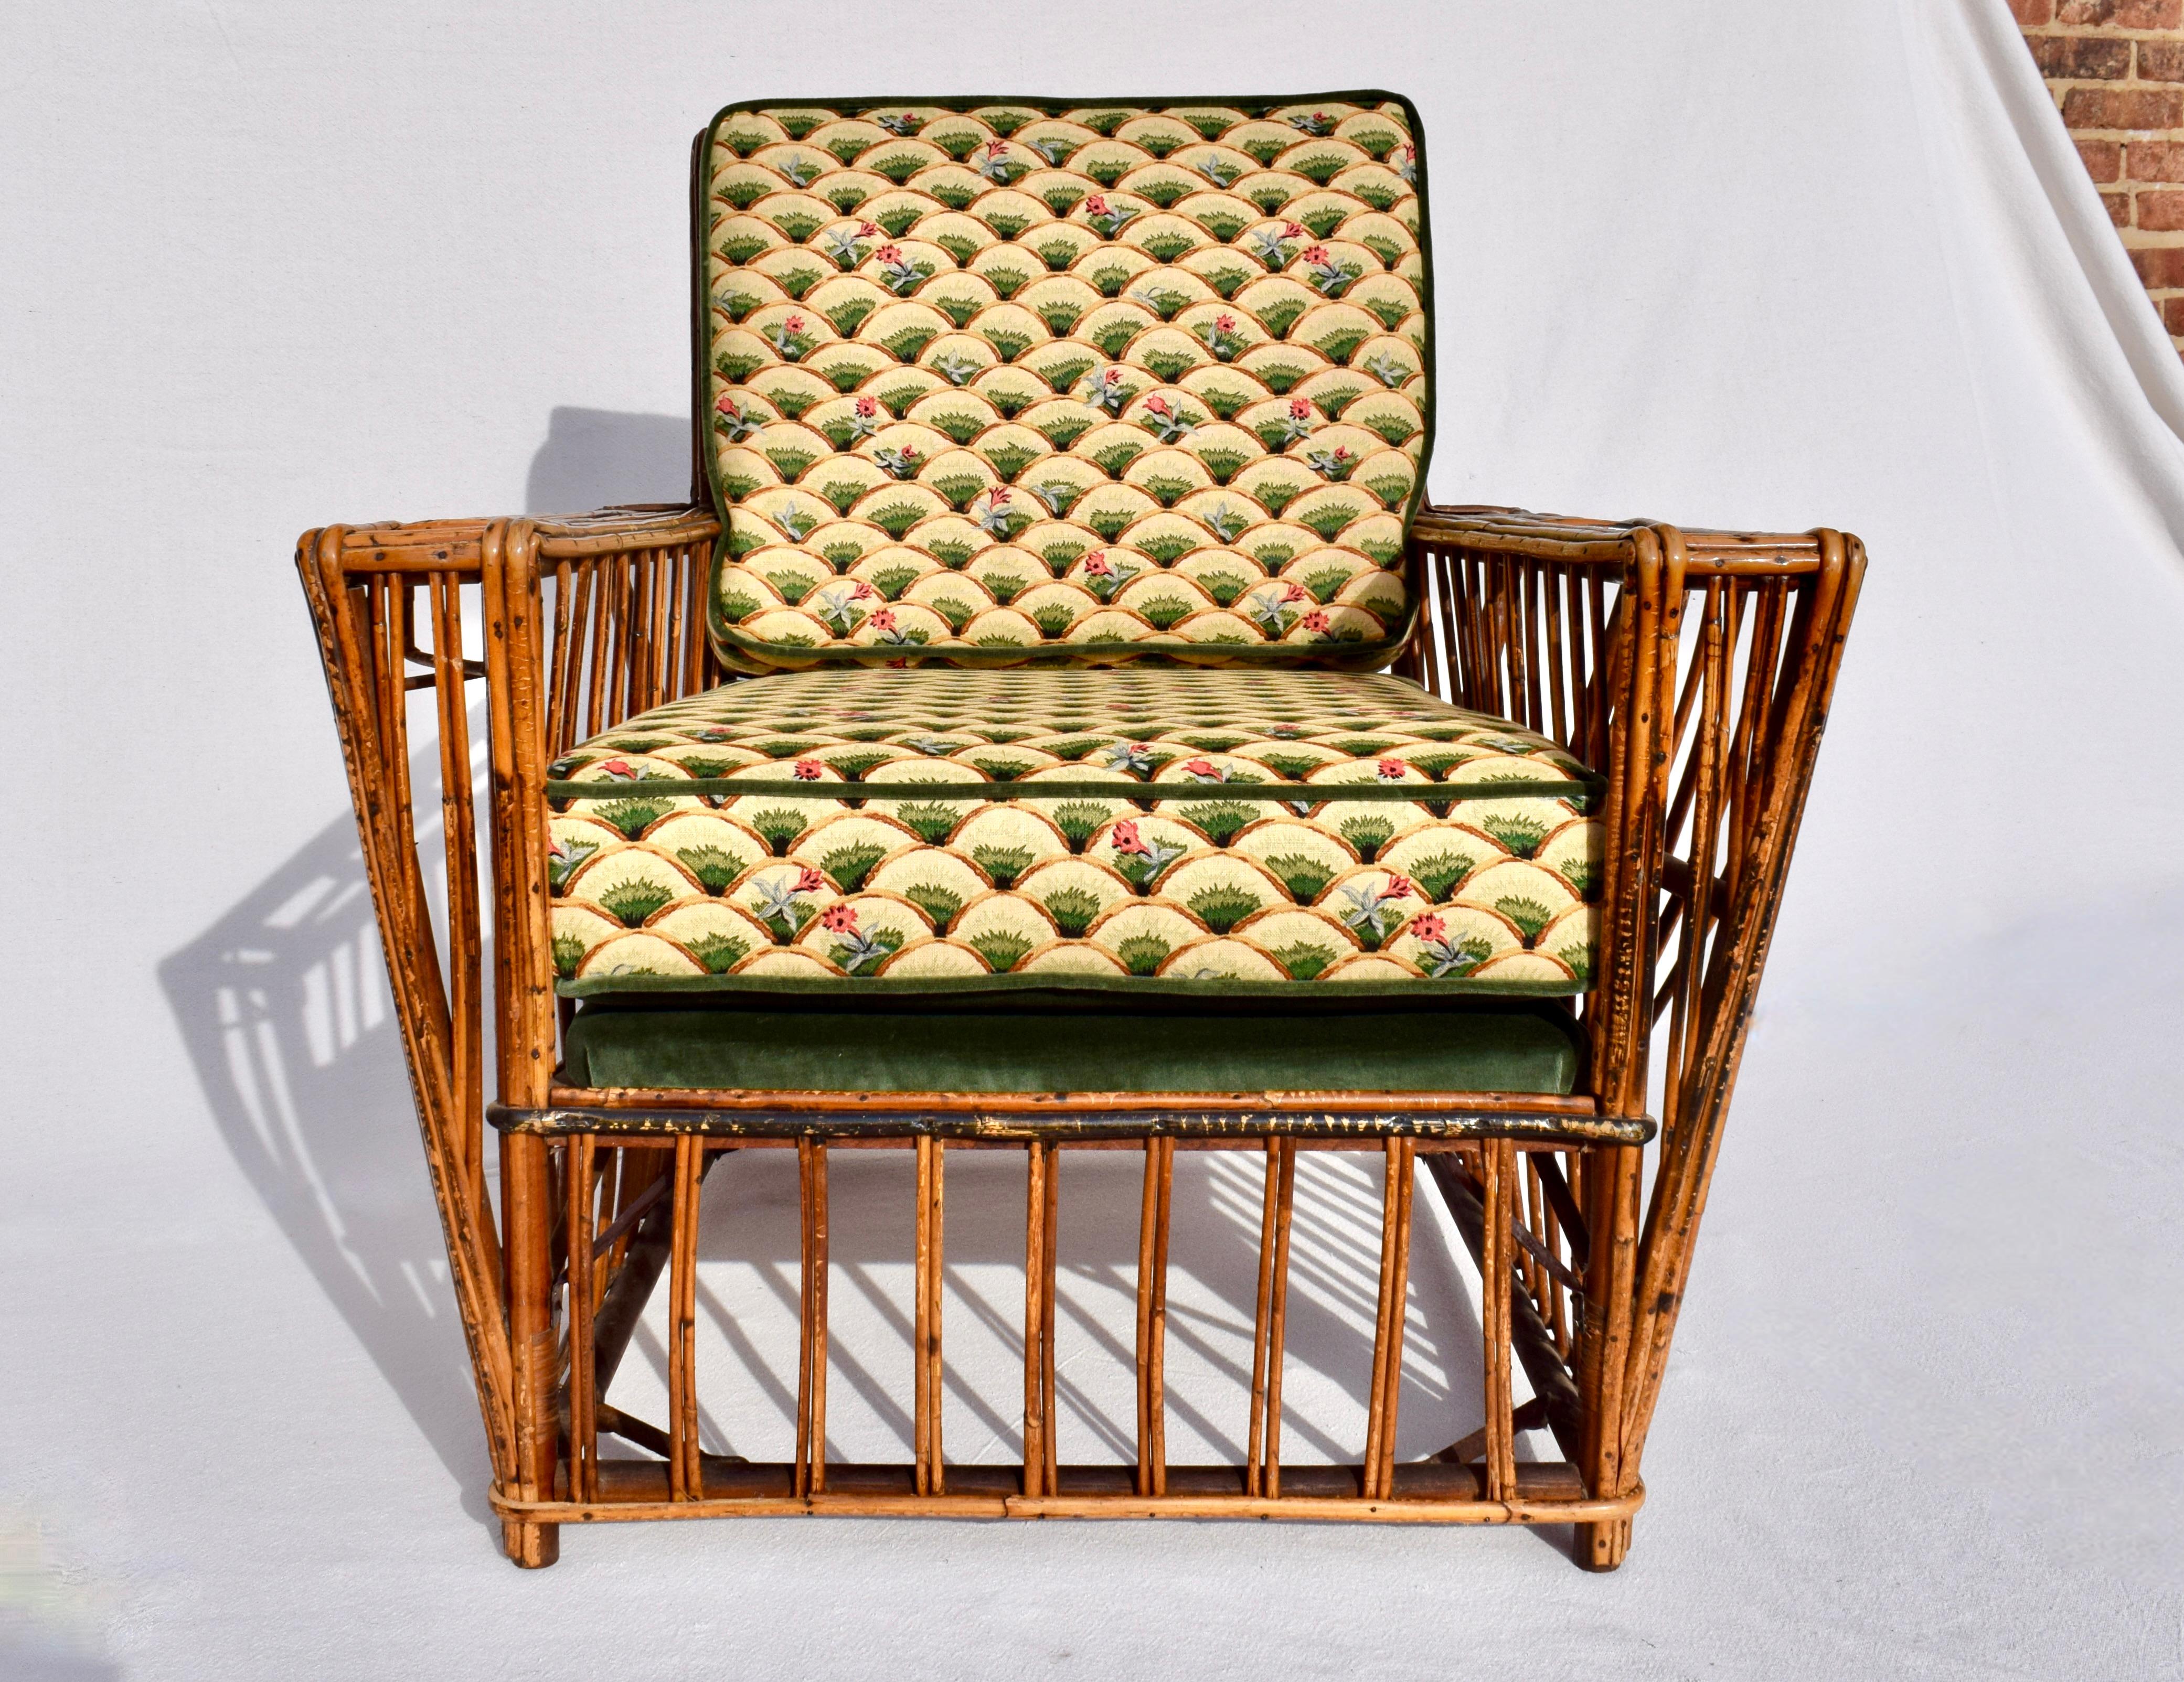 Restored Art Deco split reed stick wicker lounge chair with cup and magazine holders. Features new custom cushions upholstered in vintage hand block print linen with complimenting green velvet cording & deck. Often referred to as Presidents chair,